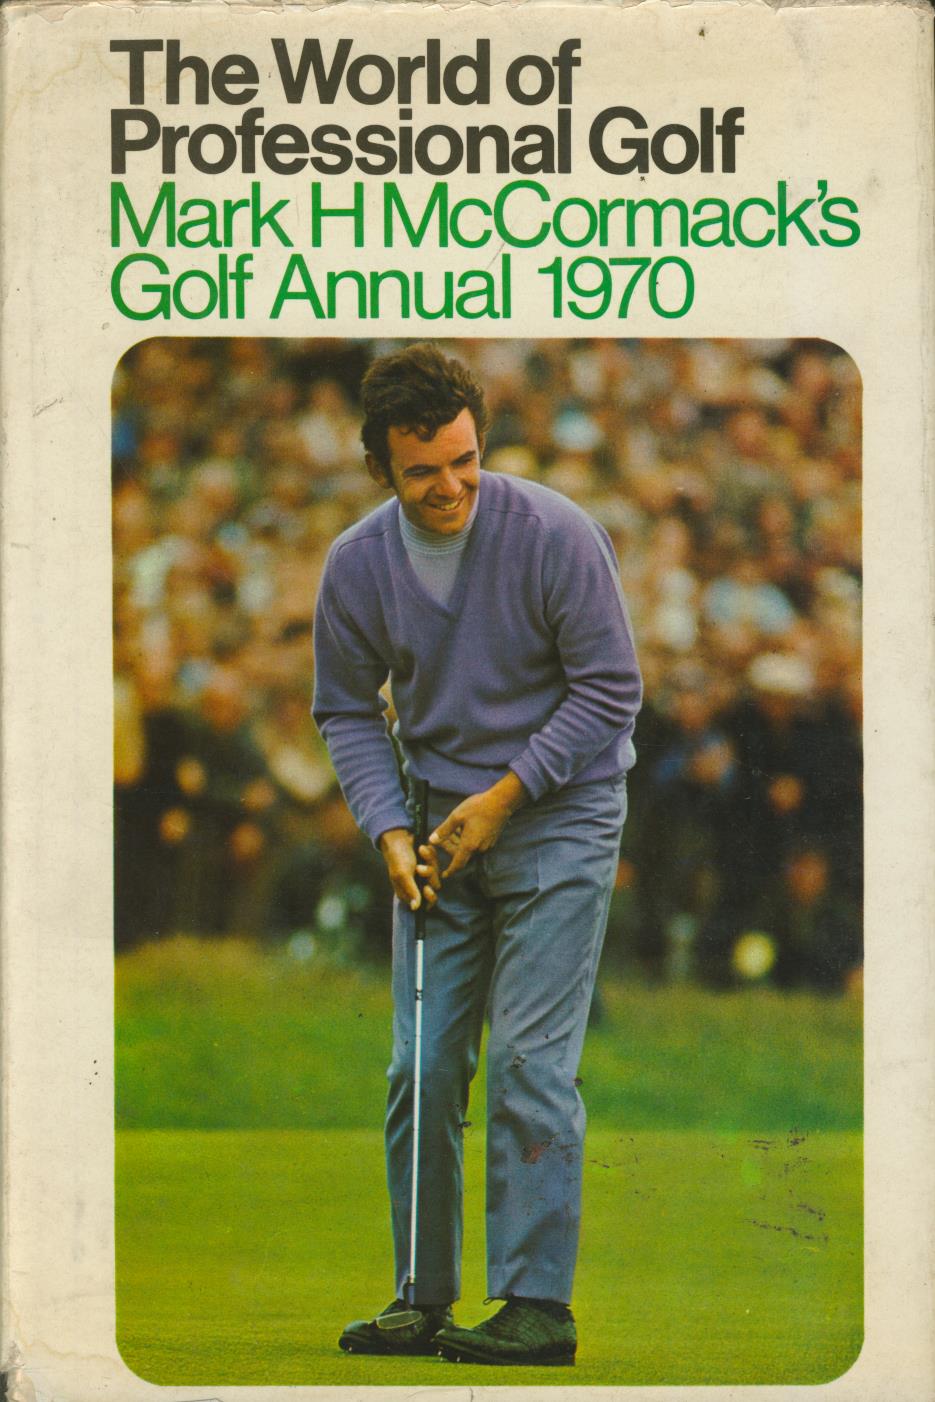 THE WORLD OF PROFESSIONAL GOLF: MARK H. MCCORMACK'S GOLF ANNUAL 1970 ...